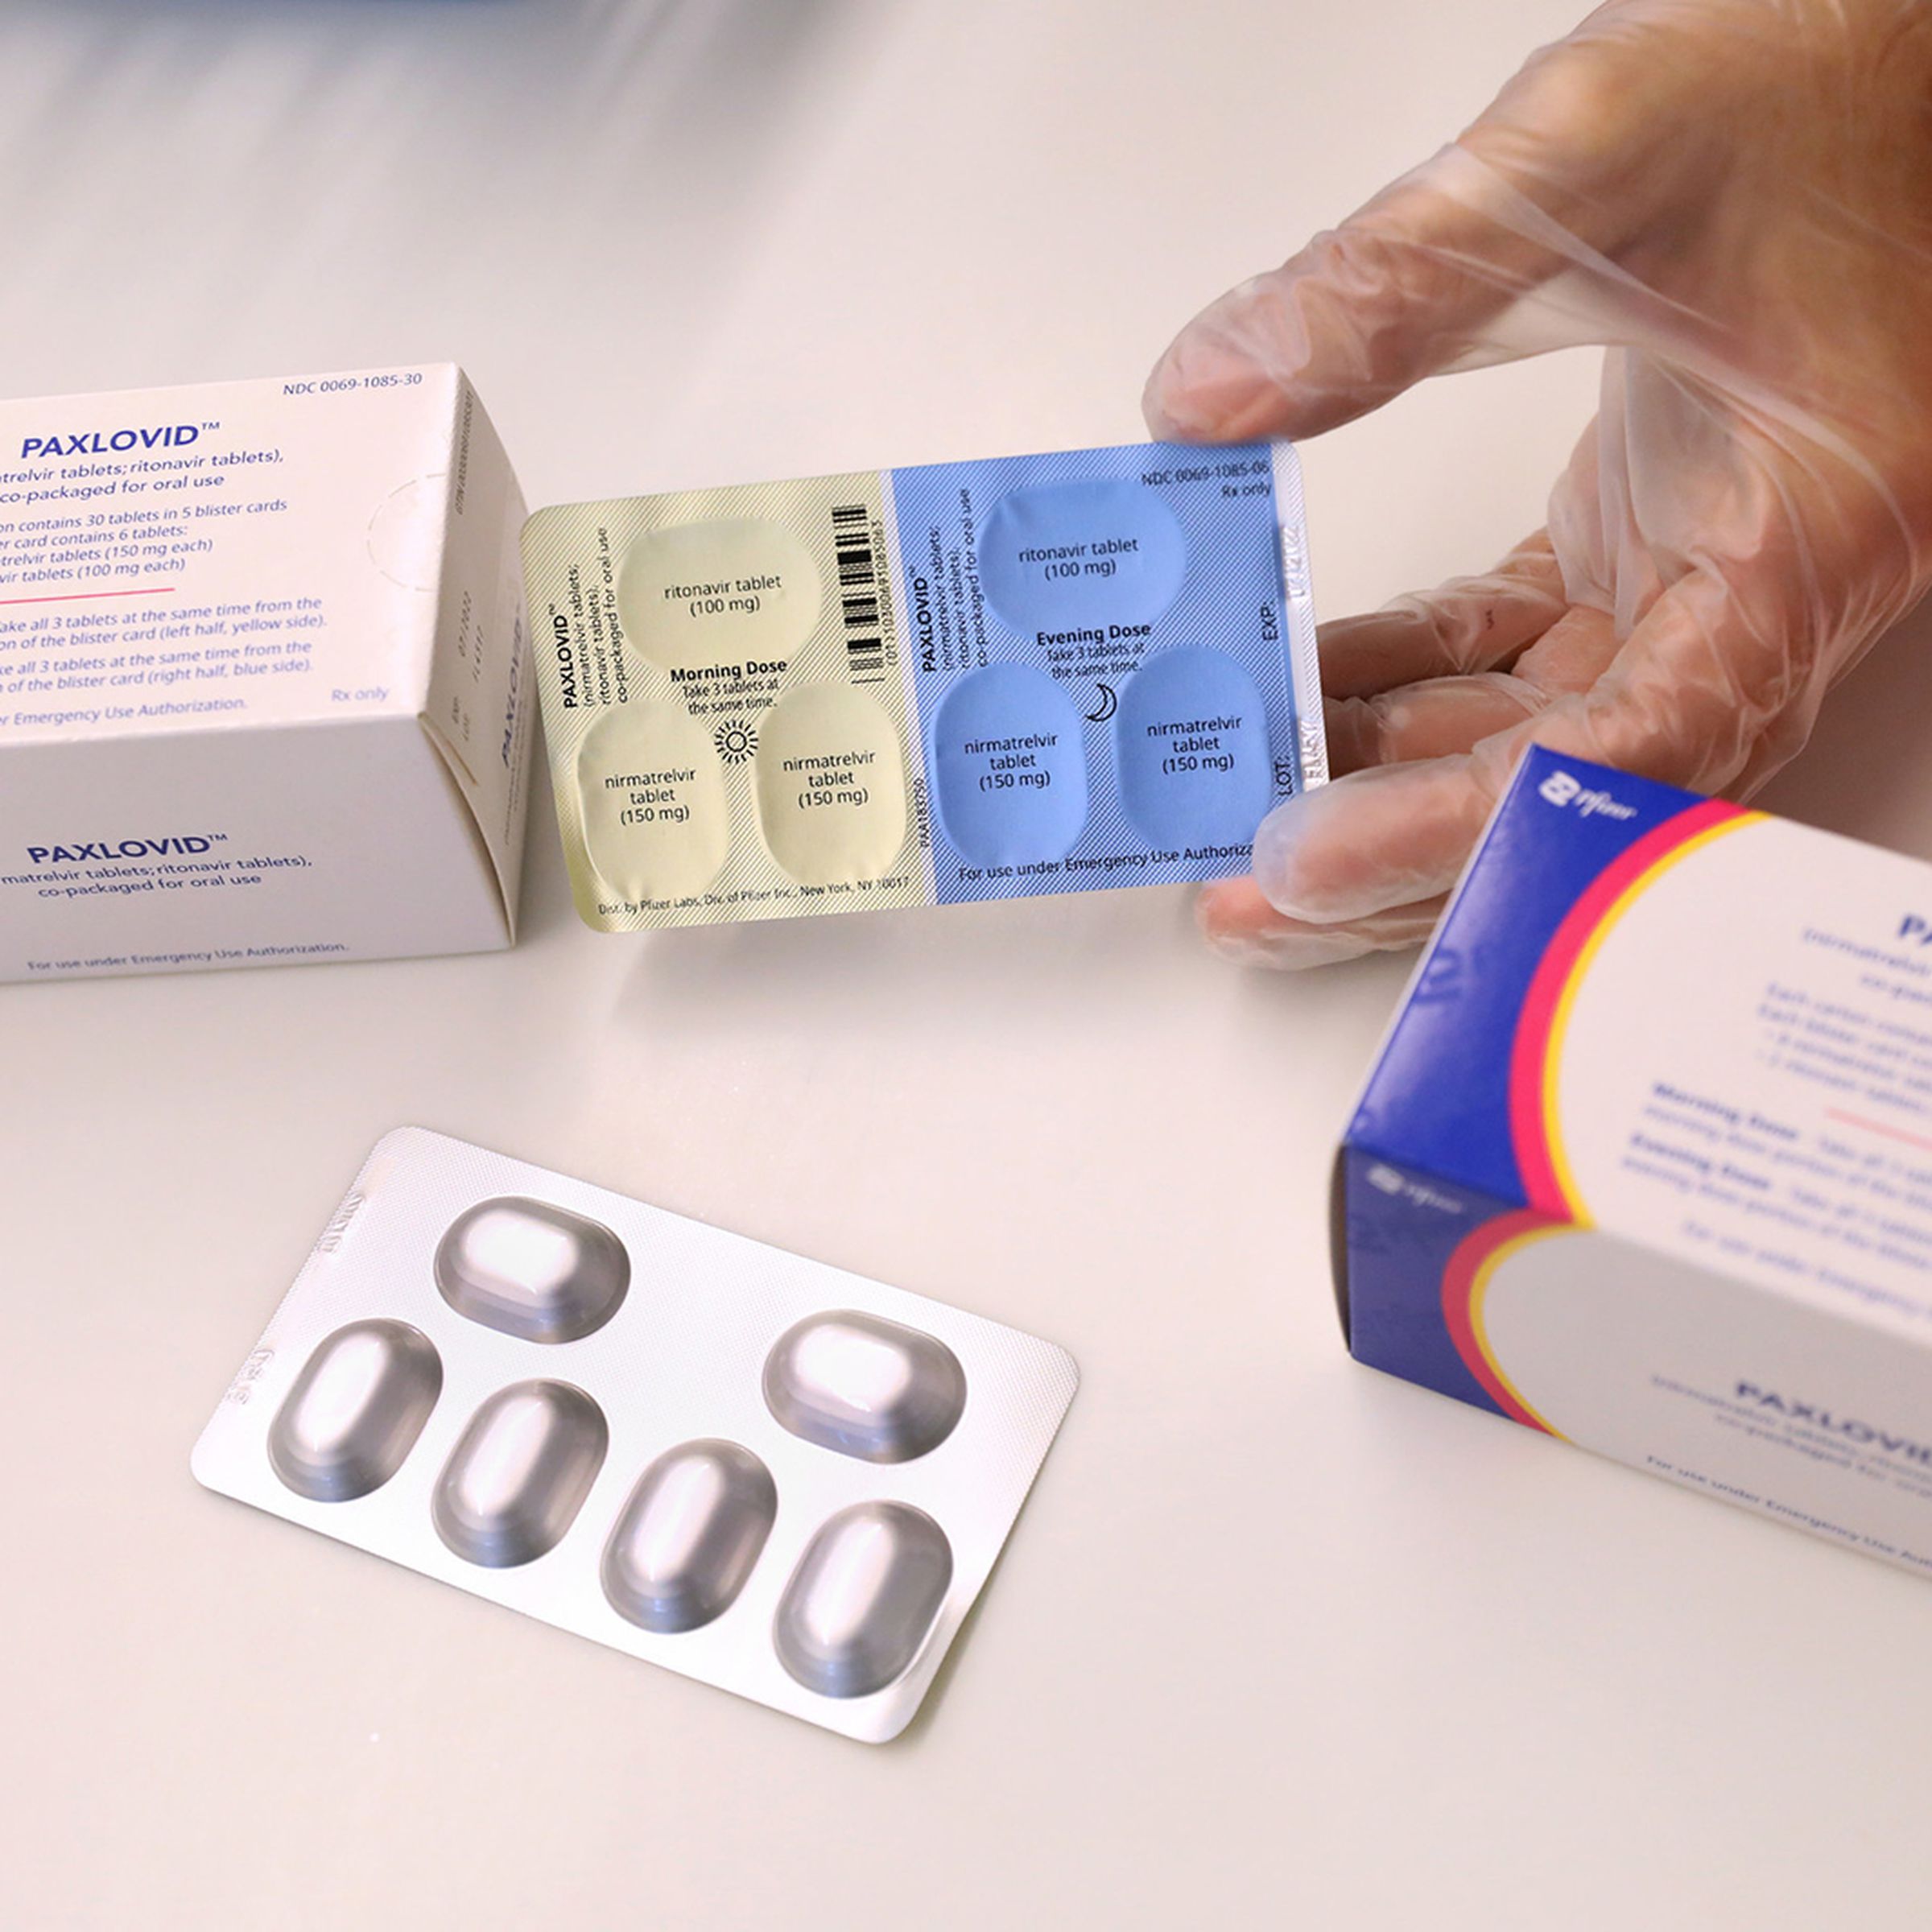 A gloved hand pulling a pill pack out of a box labeled “paxlovid”